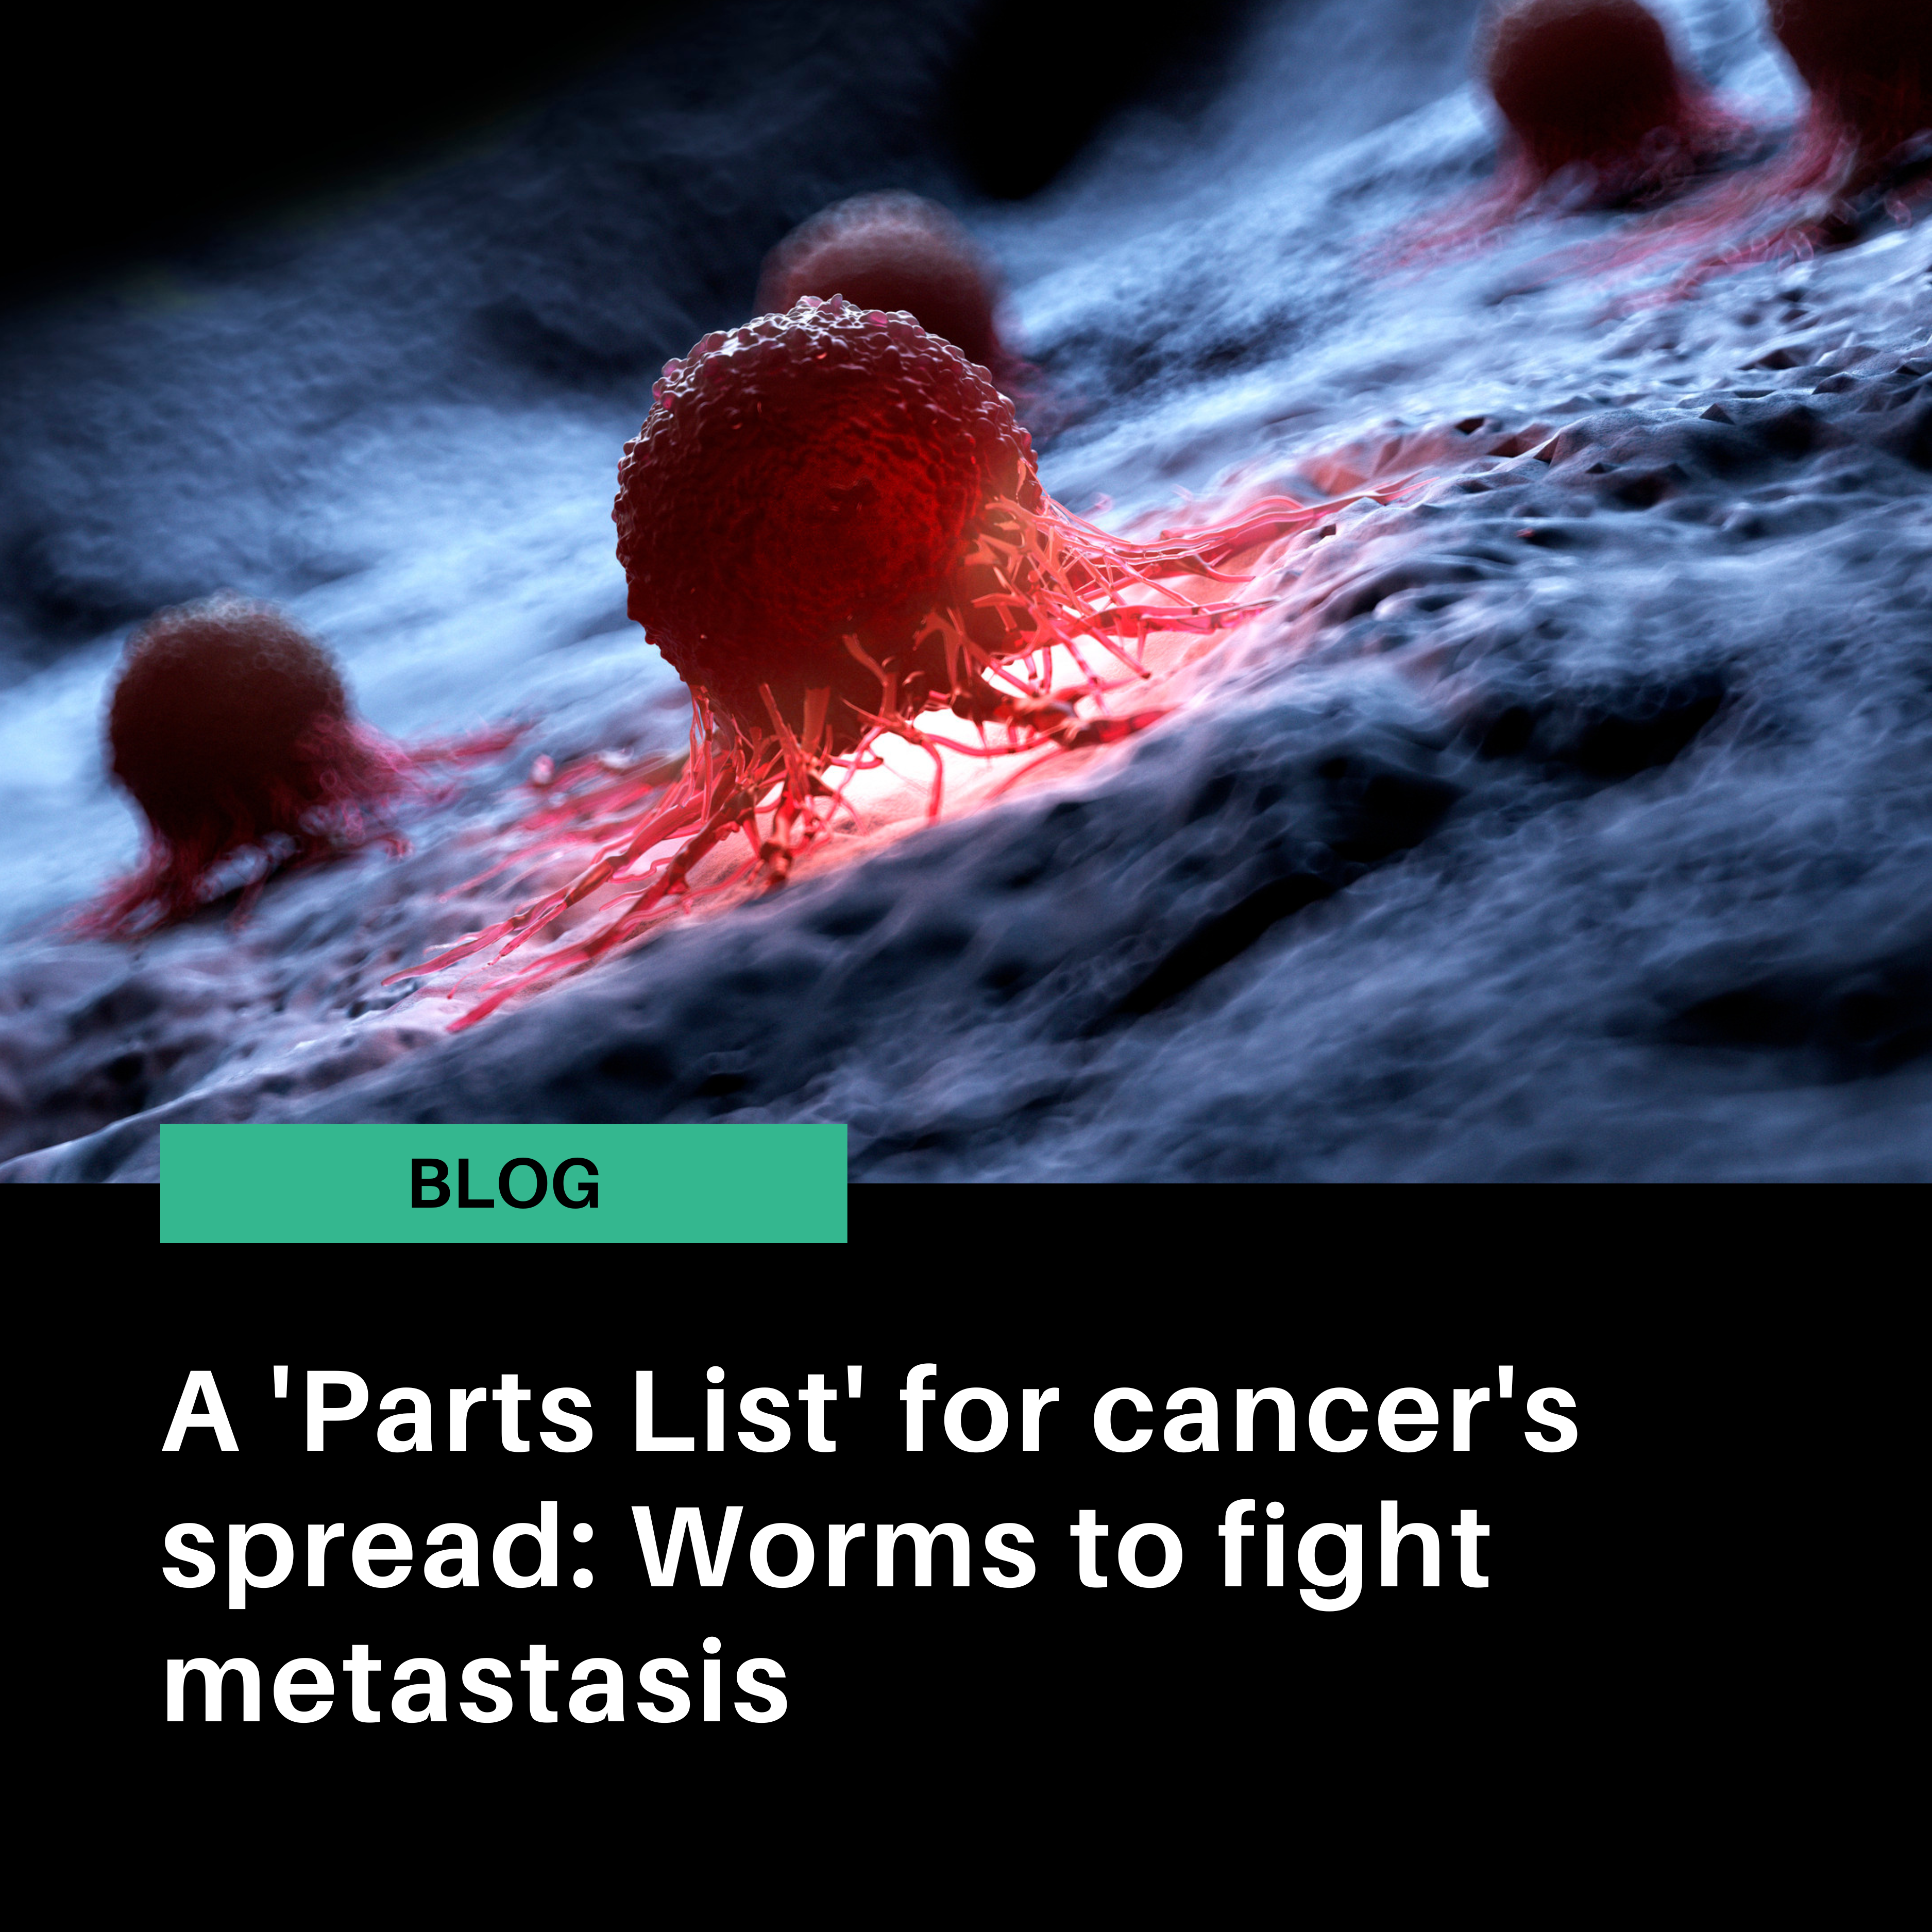 A 'Parts List' for cancer's spread: Worms to fight metastasis